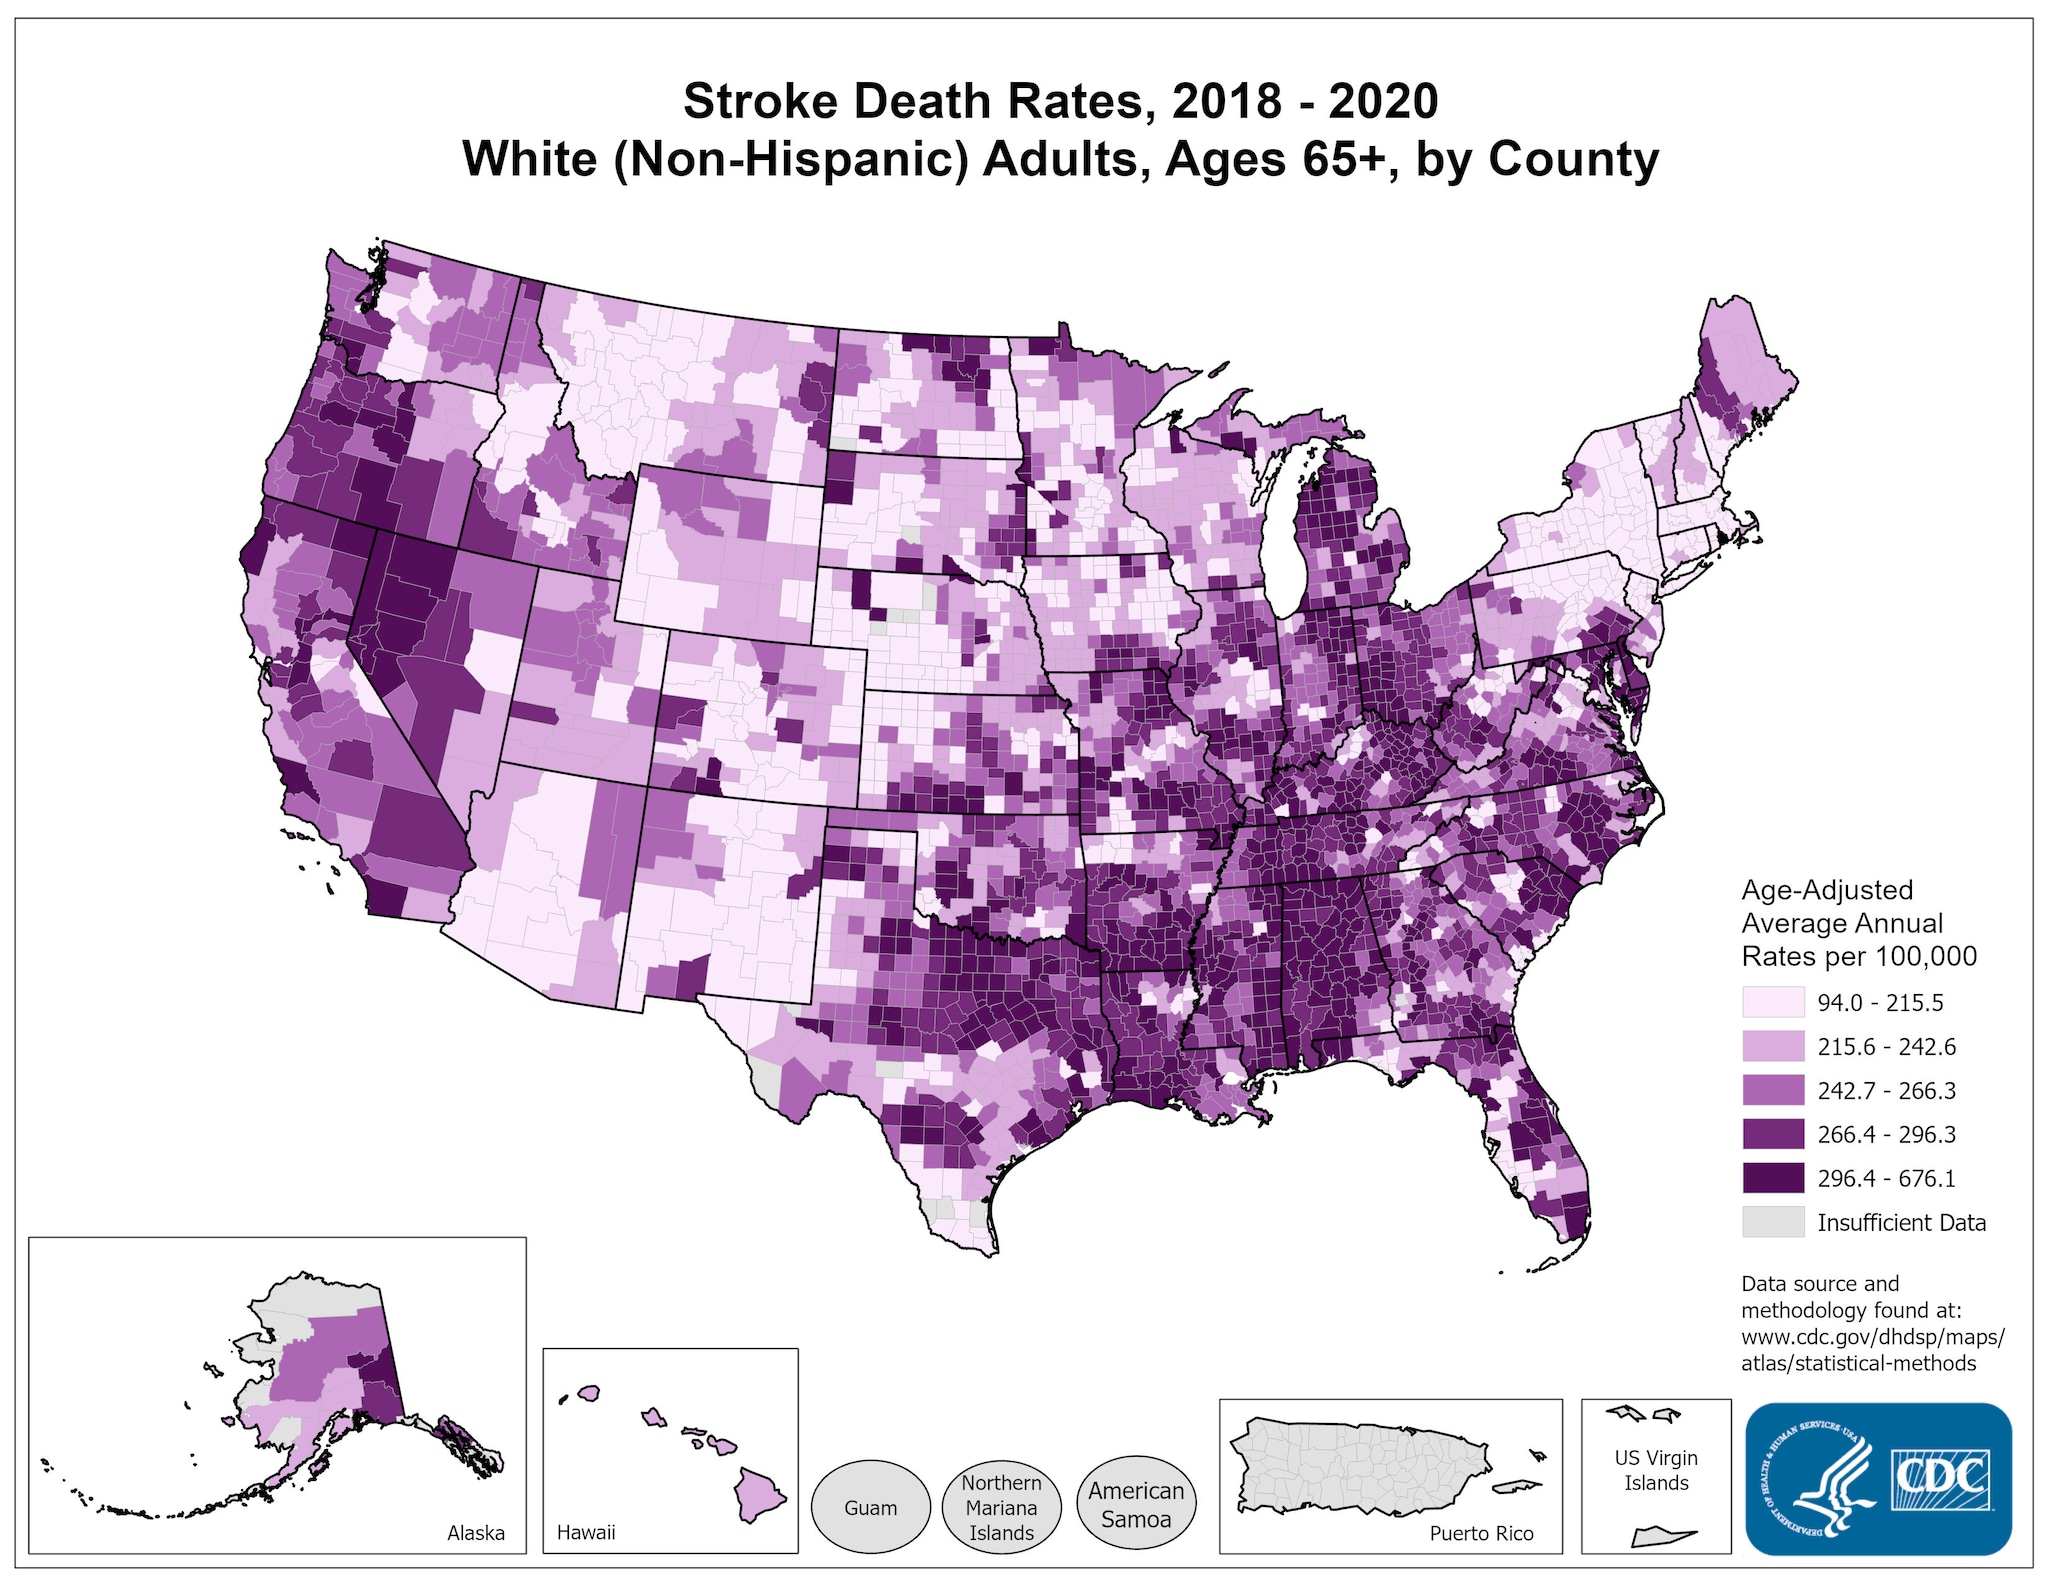 Stroke Death Rates for 2018 through 2020 for Whites Aged 65 Years and Older by County